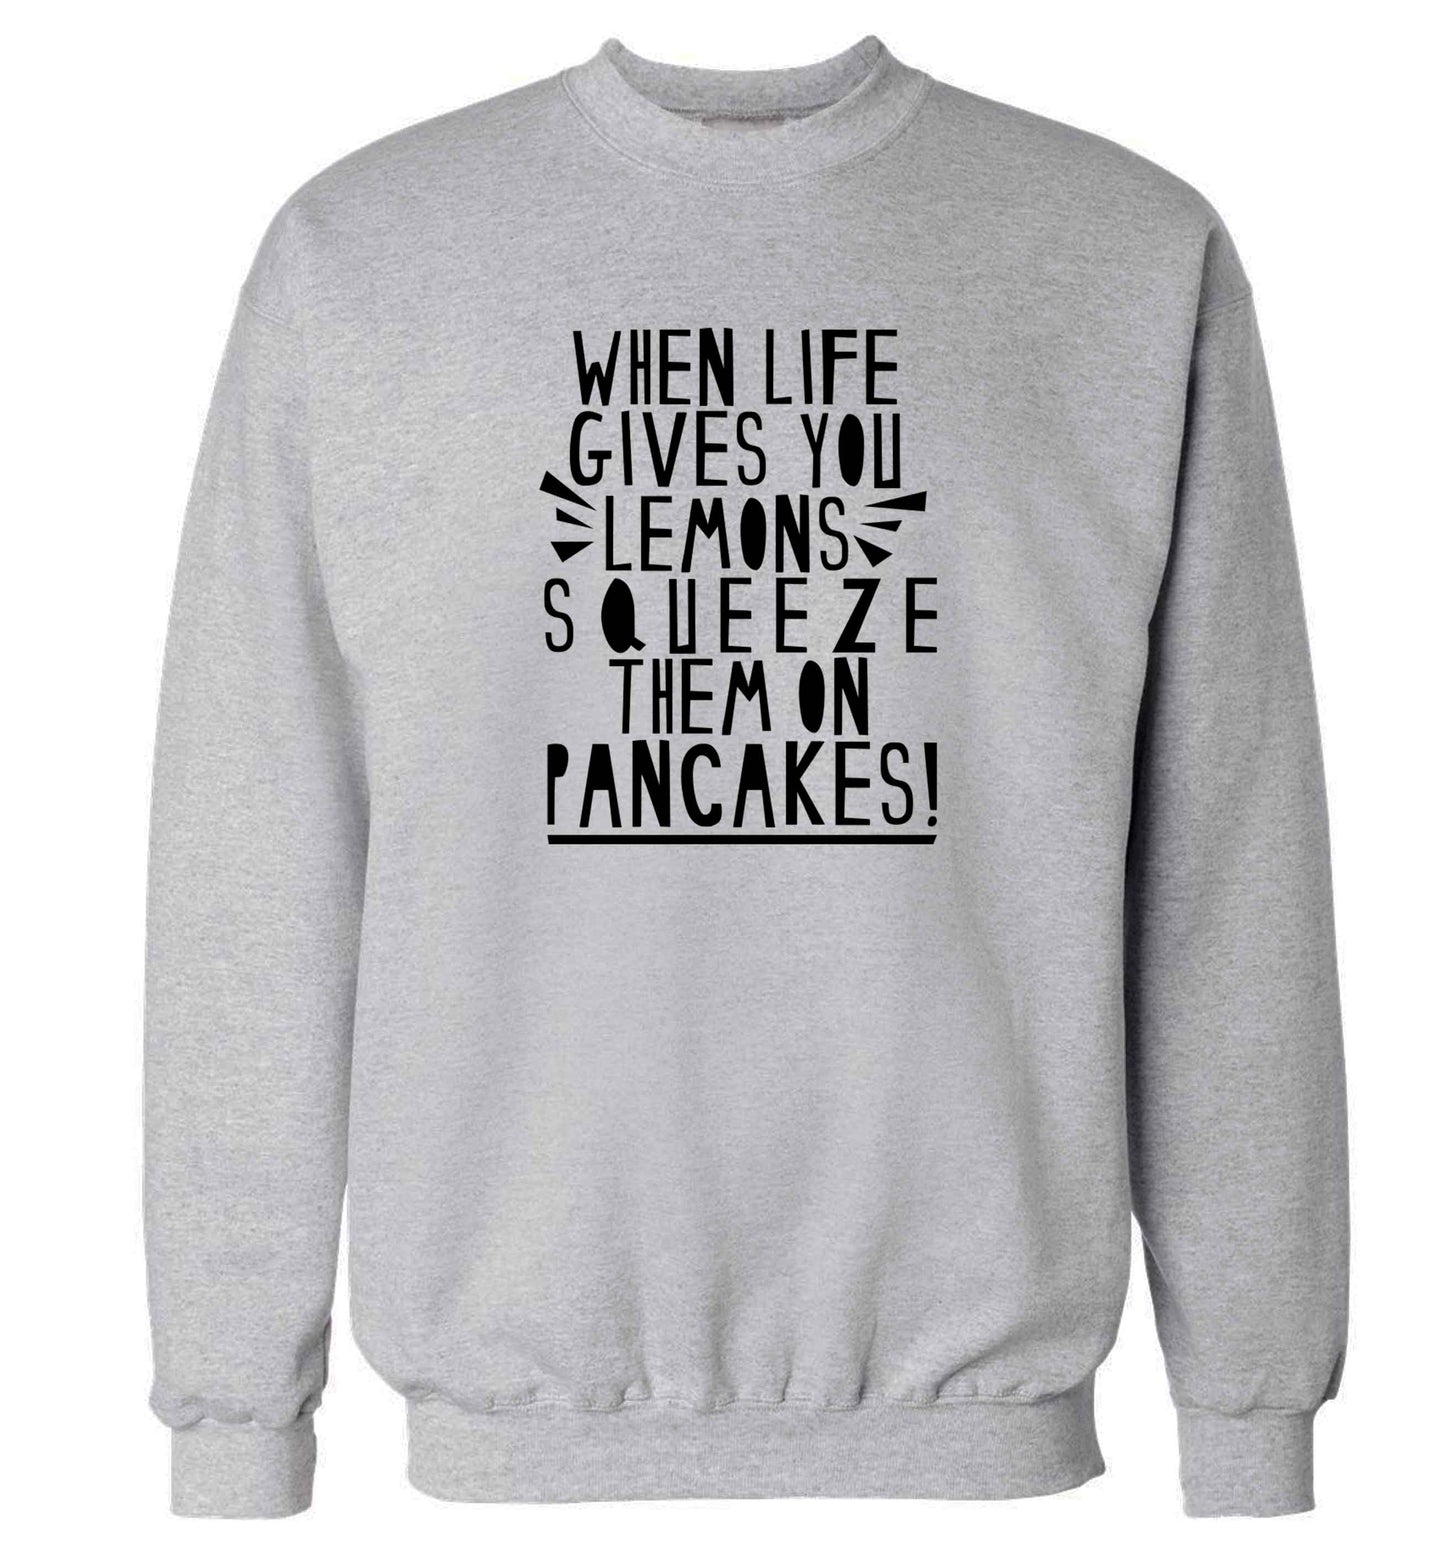 When life gives you lemons squeeze them on pancakes! adult's unisex grey sweater 2XL